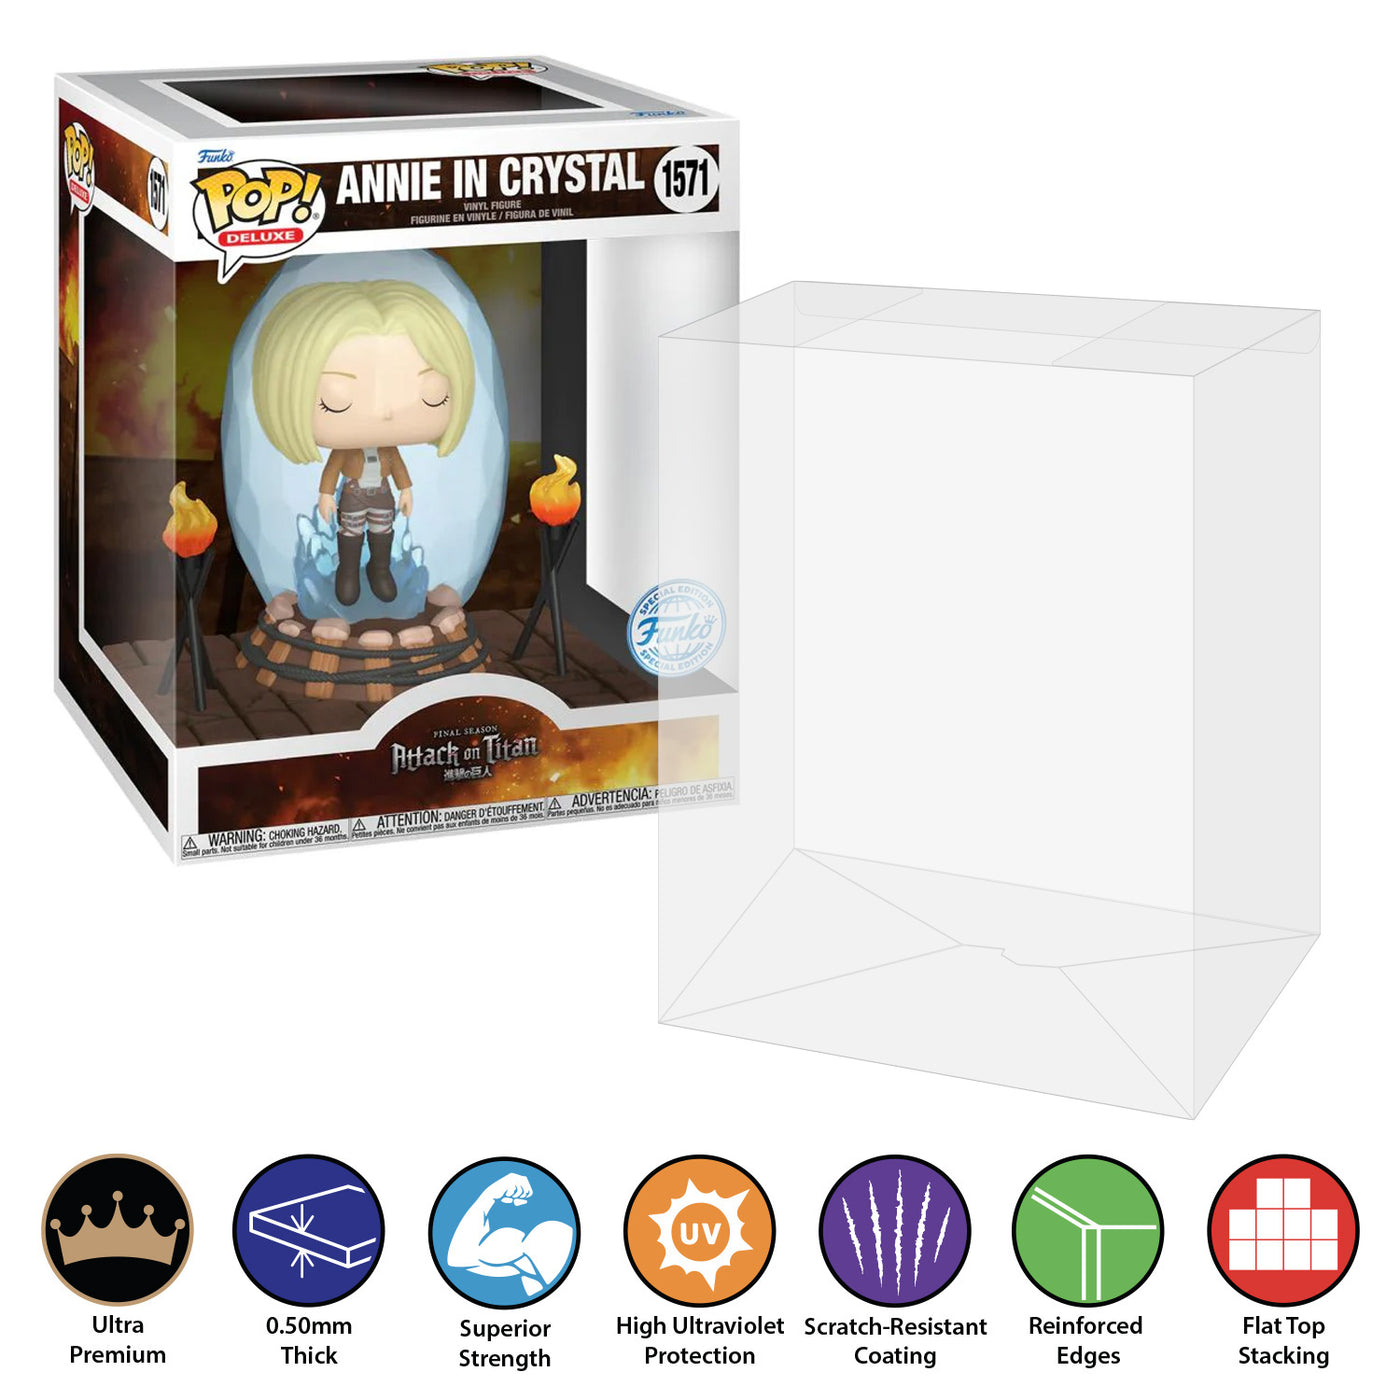 1571 pop deluxe annie in crystal attack on titan best funko pop protectors thick strong uv scratch flat top stack vinyl display geek plastic shield vaulted eco armor fits collect protect display case kollector protector